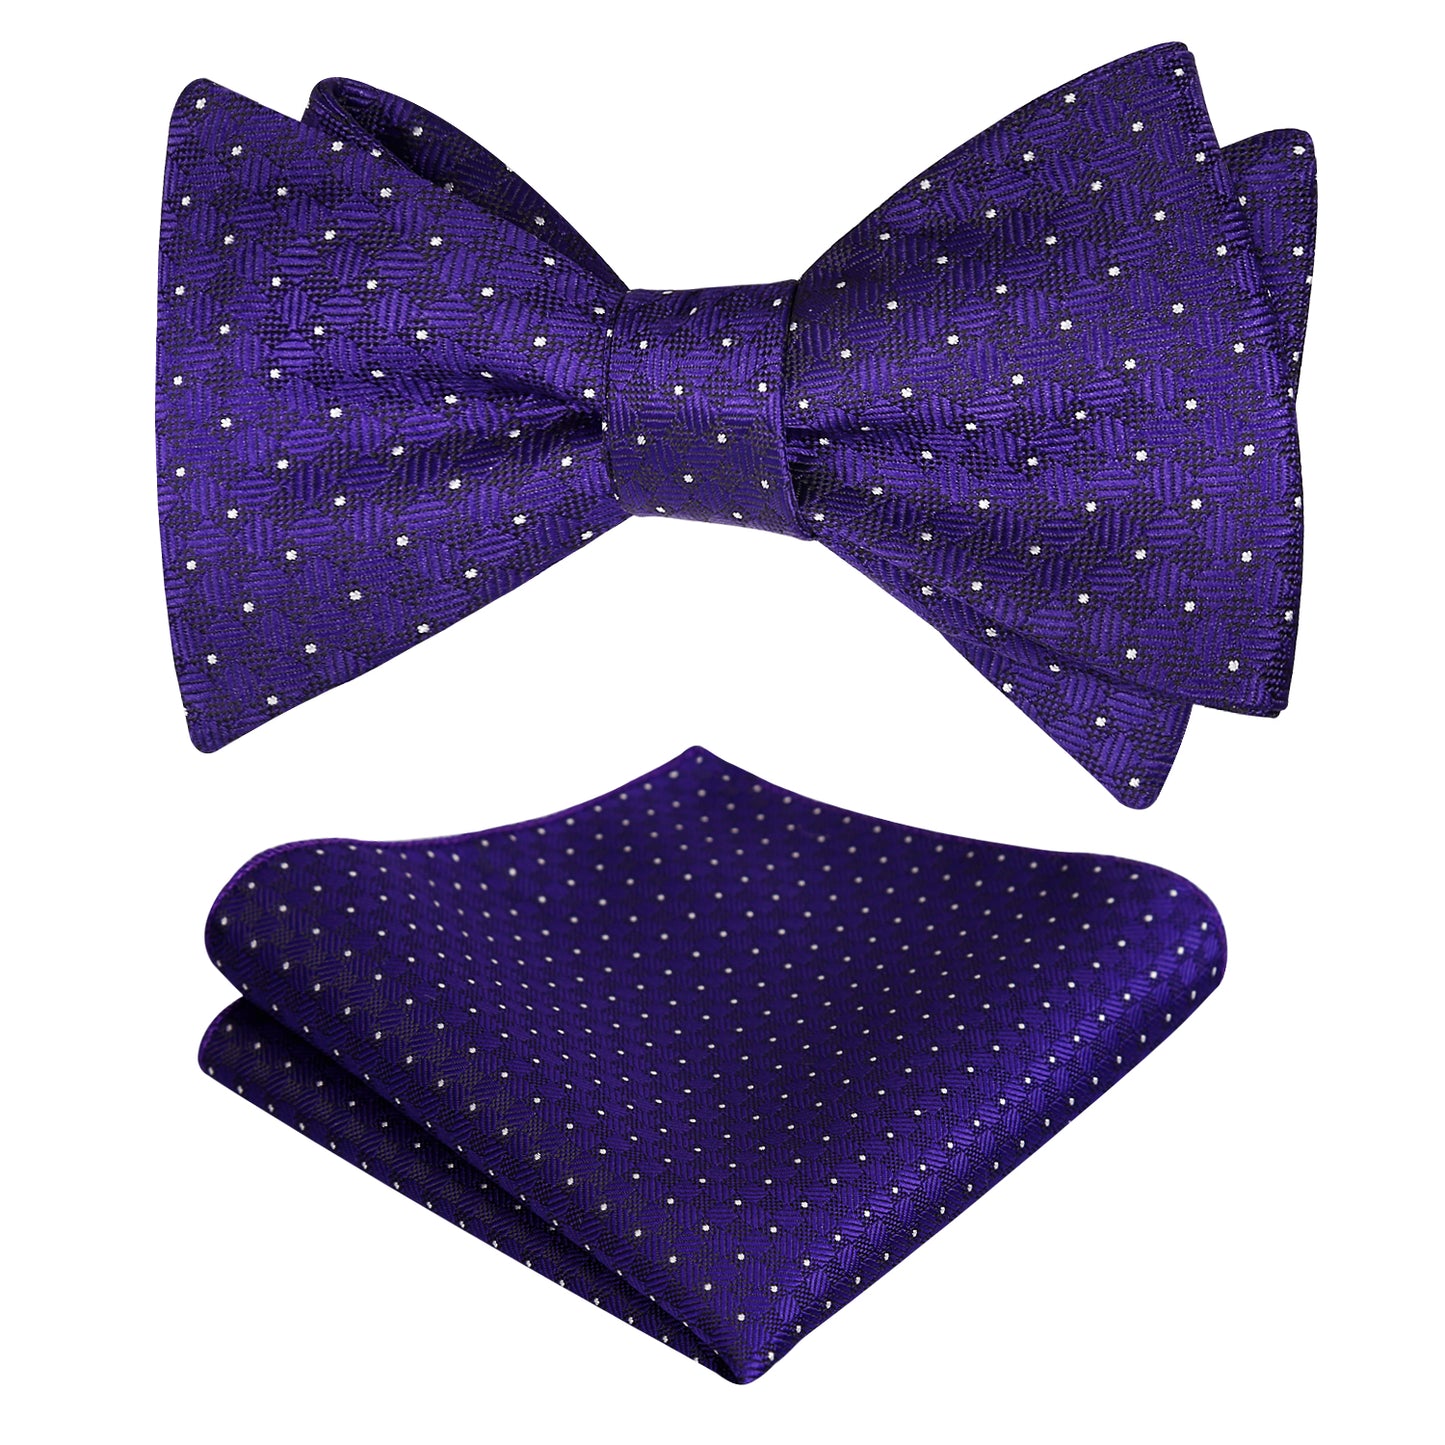 Men's Polka Dots Self-tied Bow Tie and Pocket Square Set #058